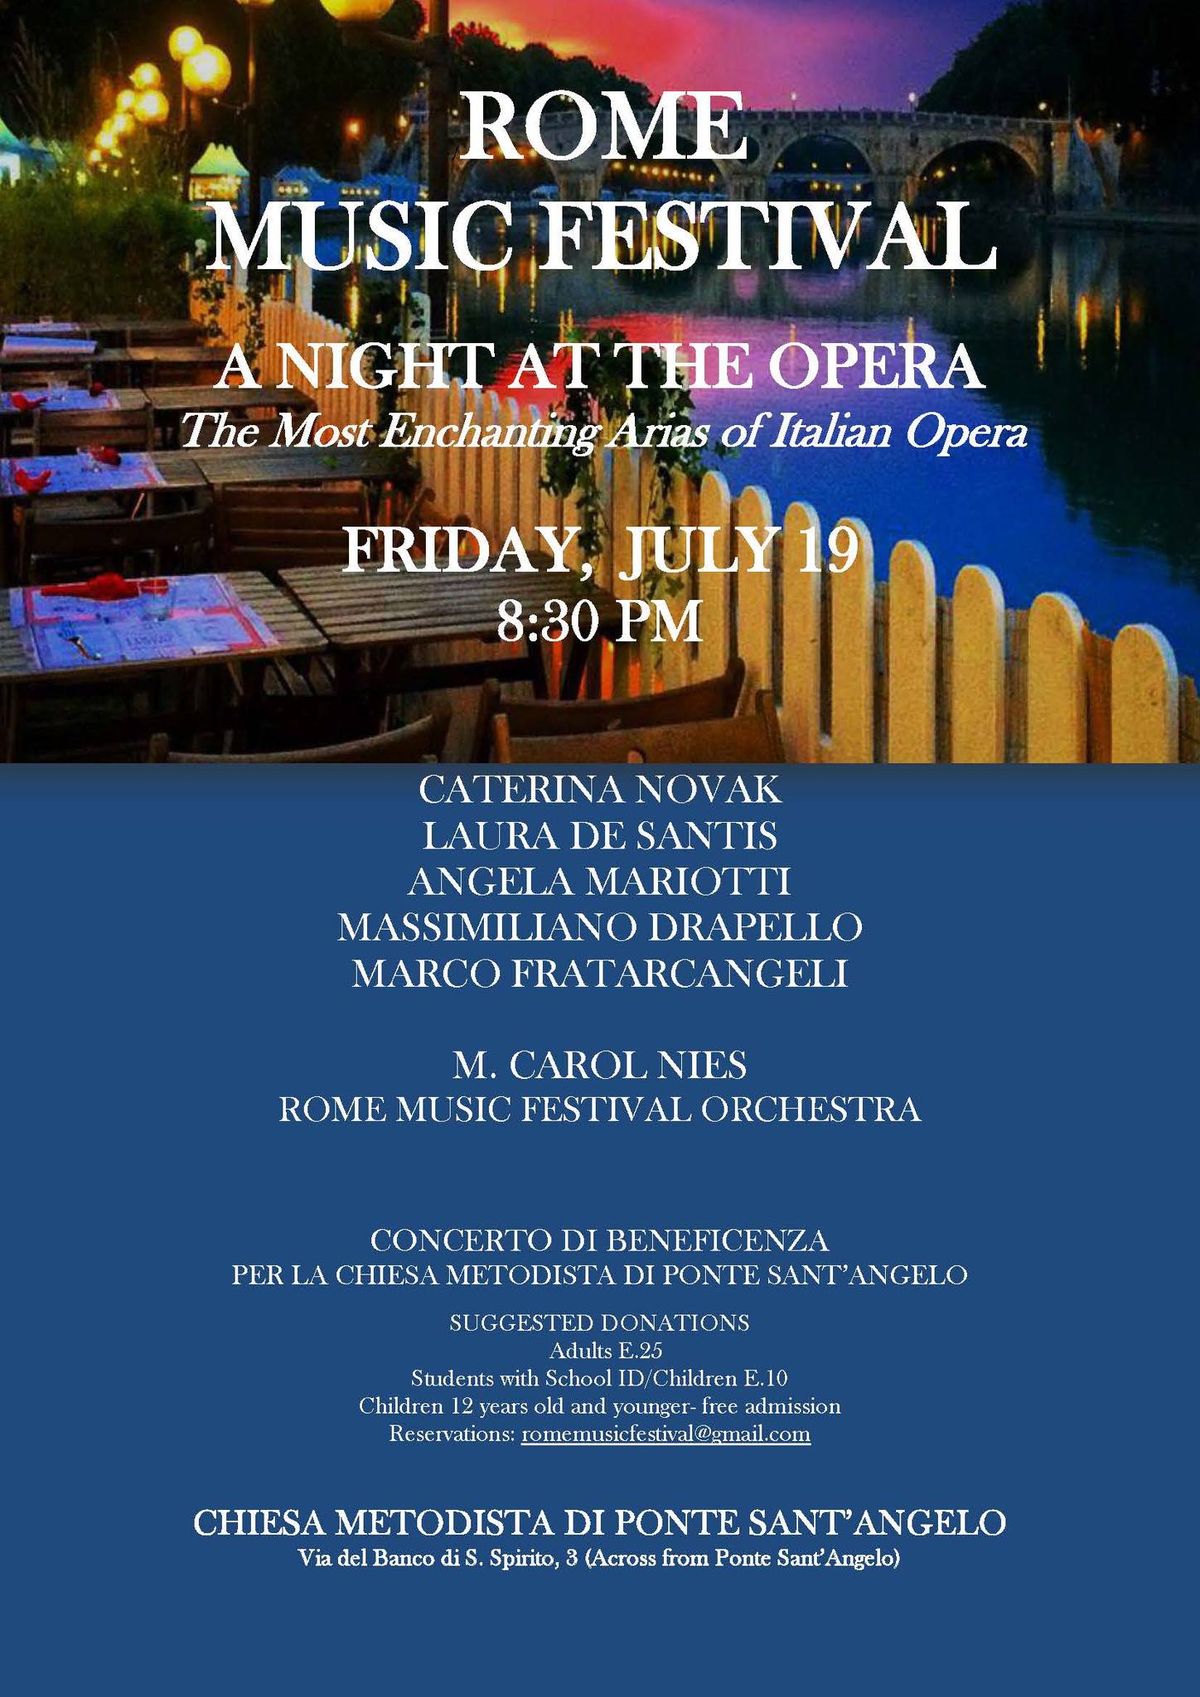 A Night At The Opera! The Most Enchanting Arias of Italian Opera